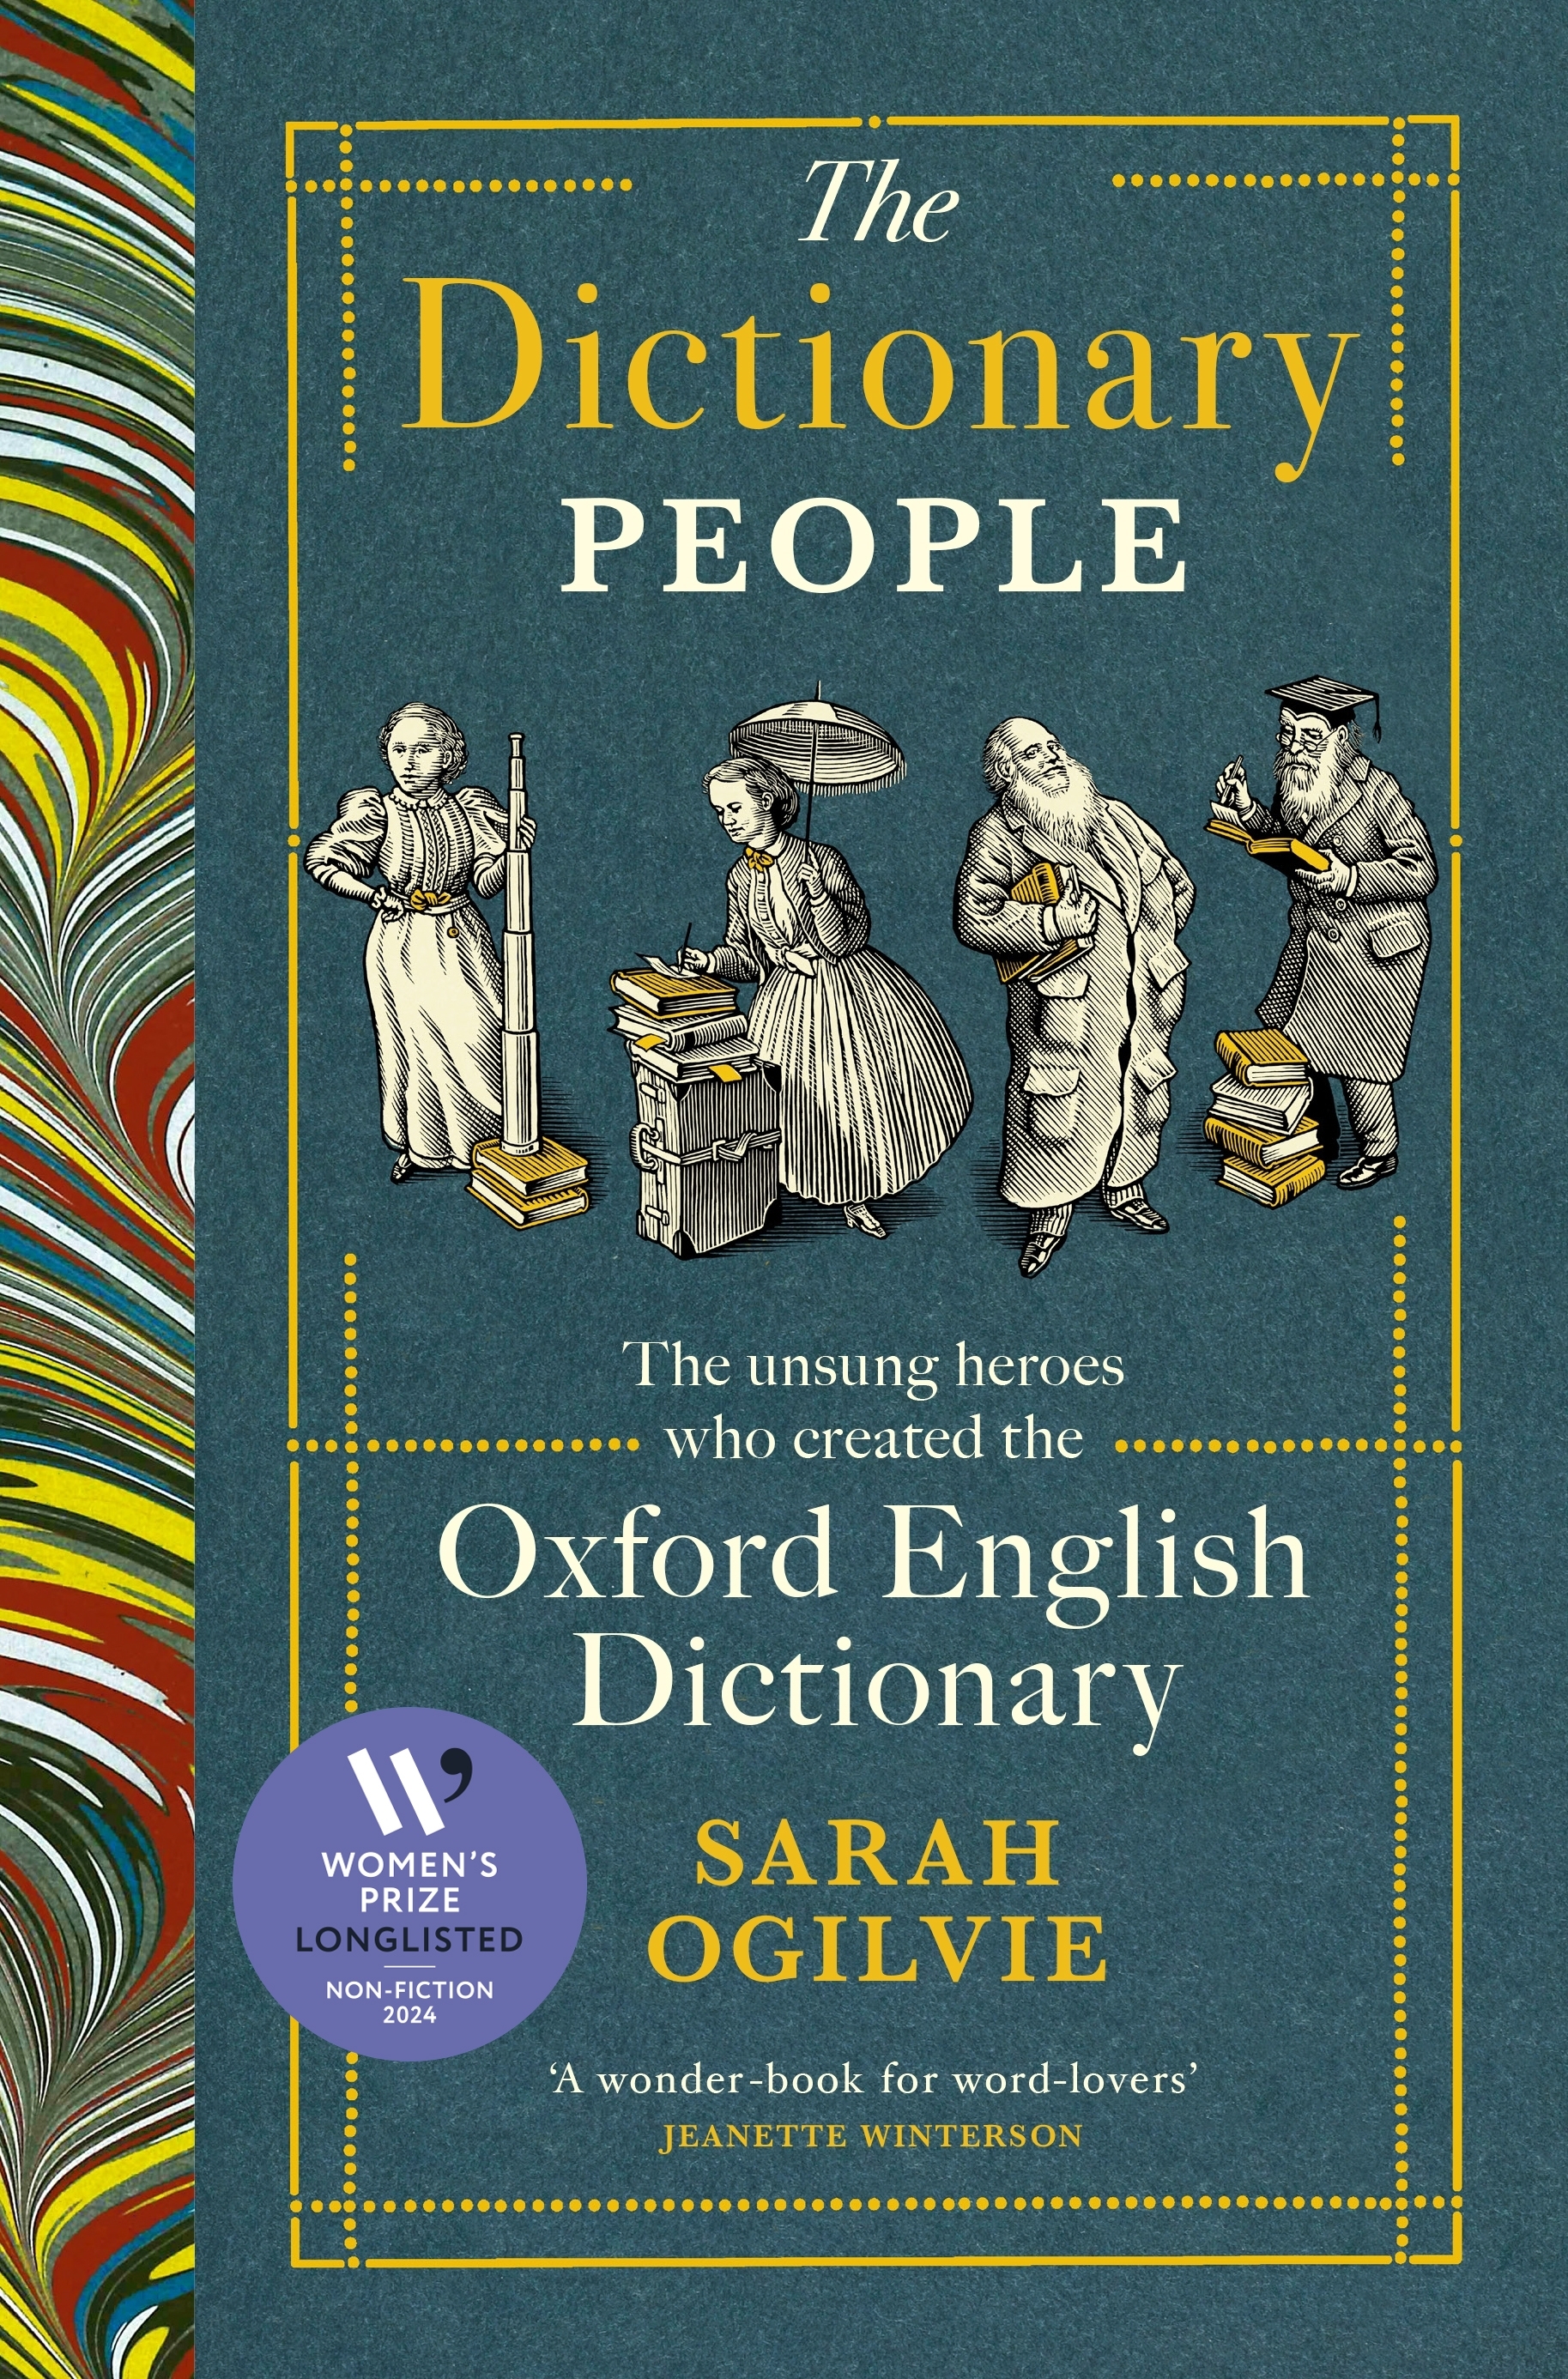 The Dictionary People by Sarah Ogilvie - Penguin Books Australia